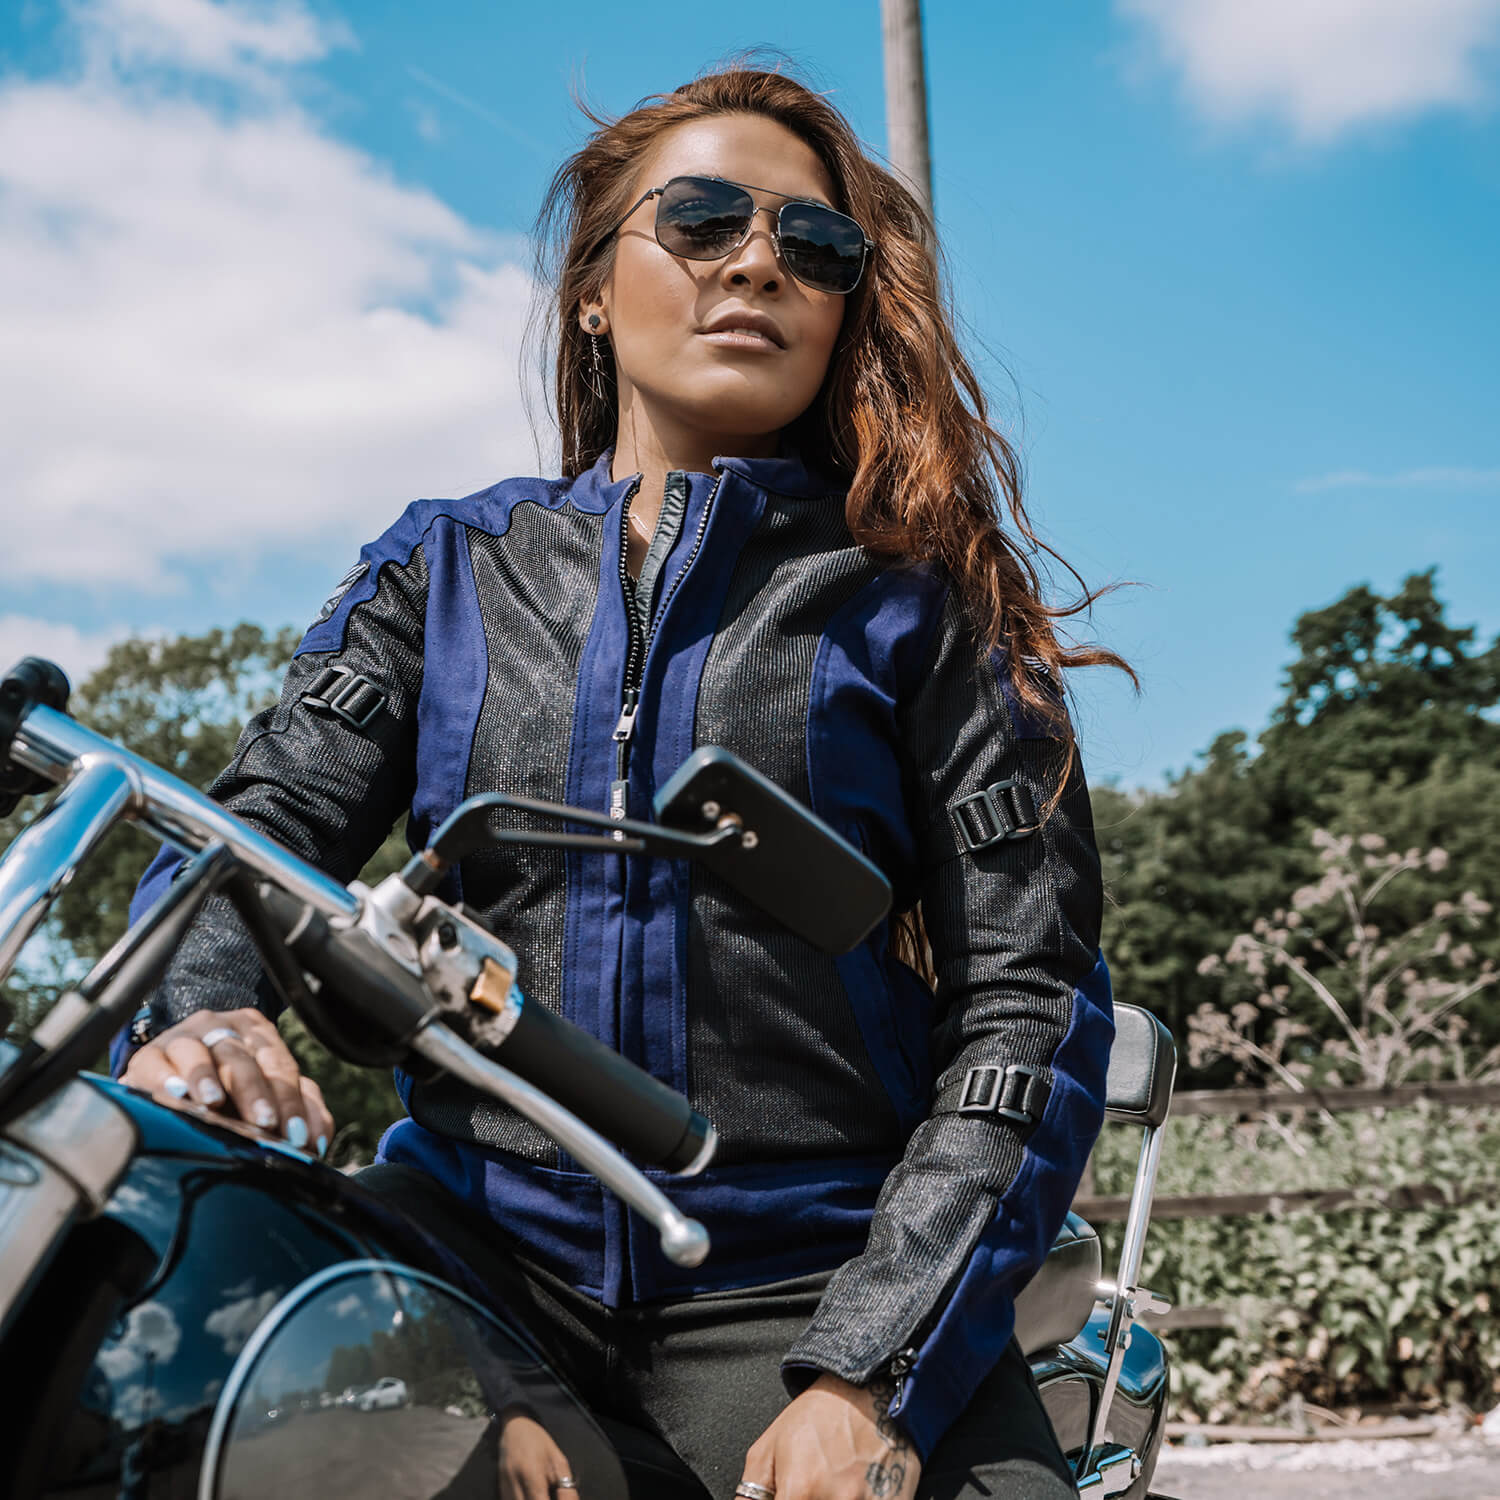 Beat the Heat - Why You Should Stock Up on Summer Motorcycle Gear